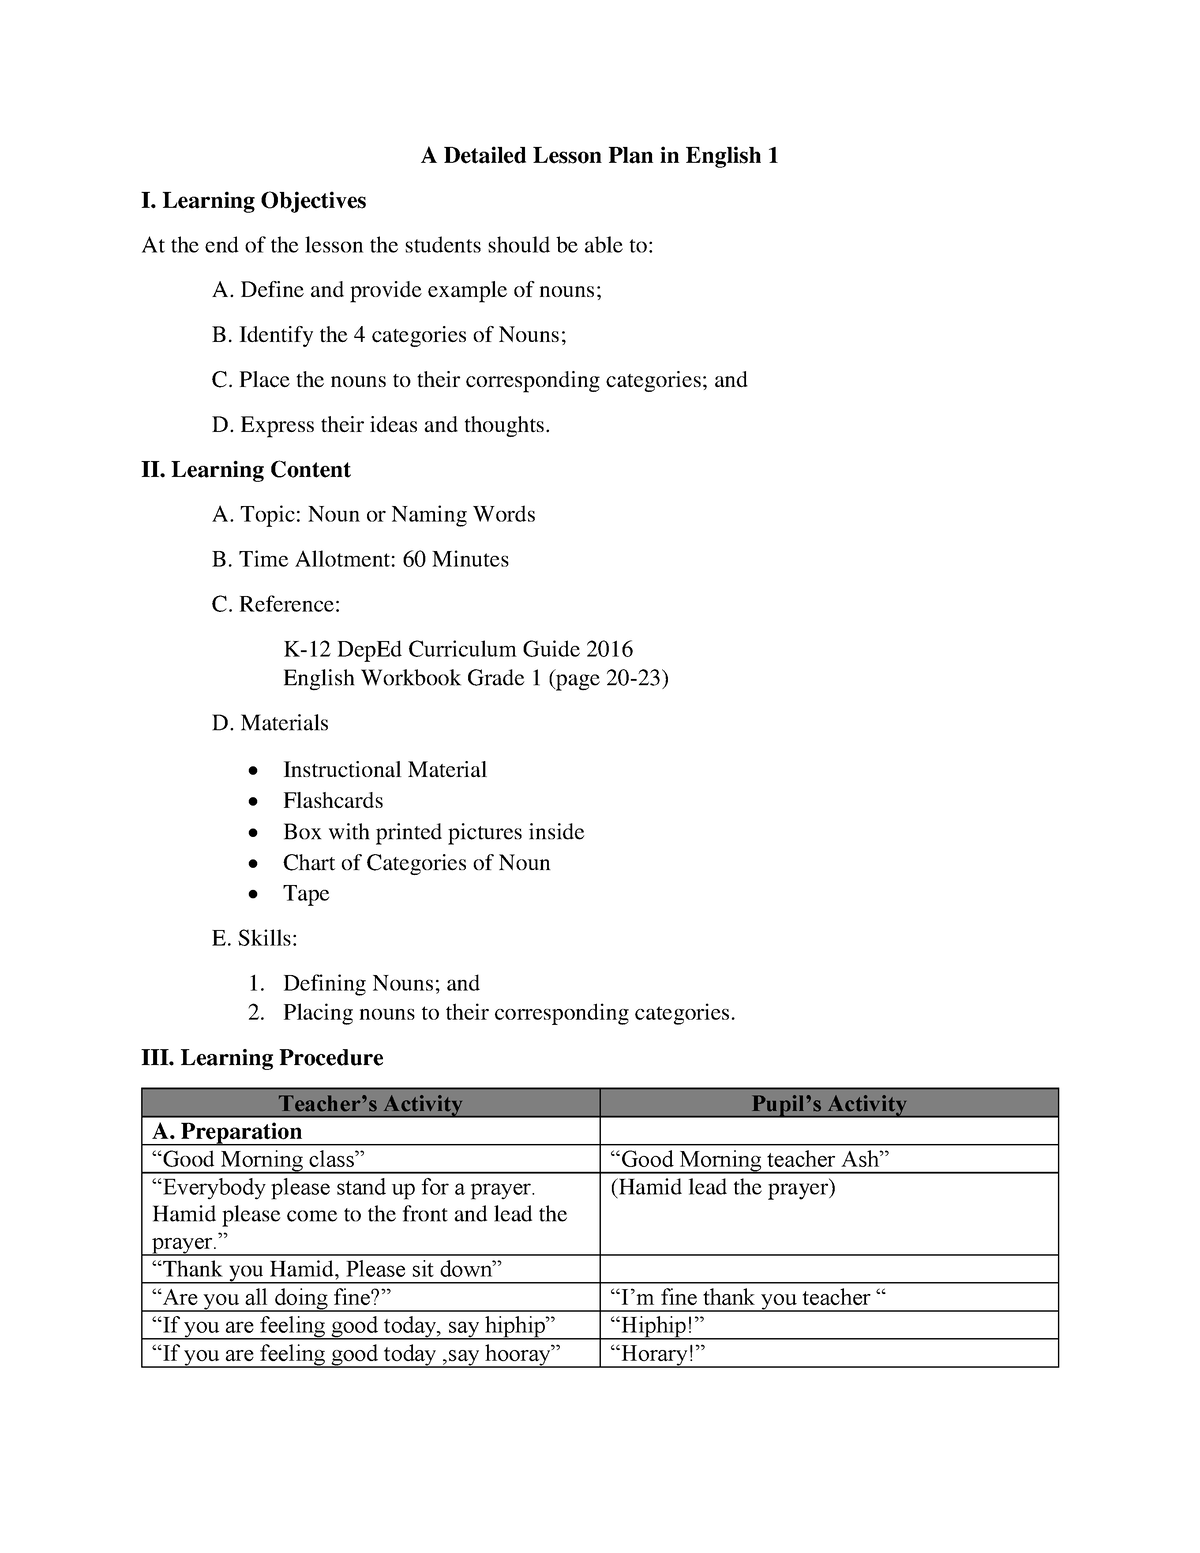 Detailed Lesson Plan In English Grade 1 A Detailed Lesson Plan In 